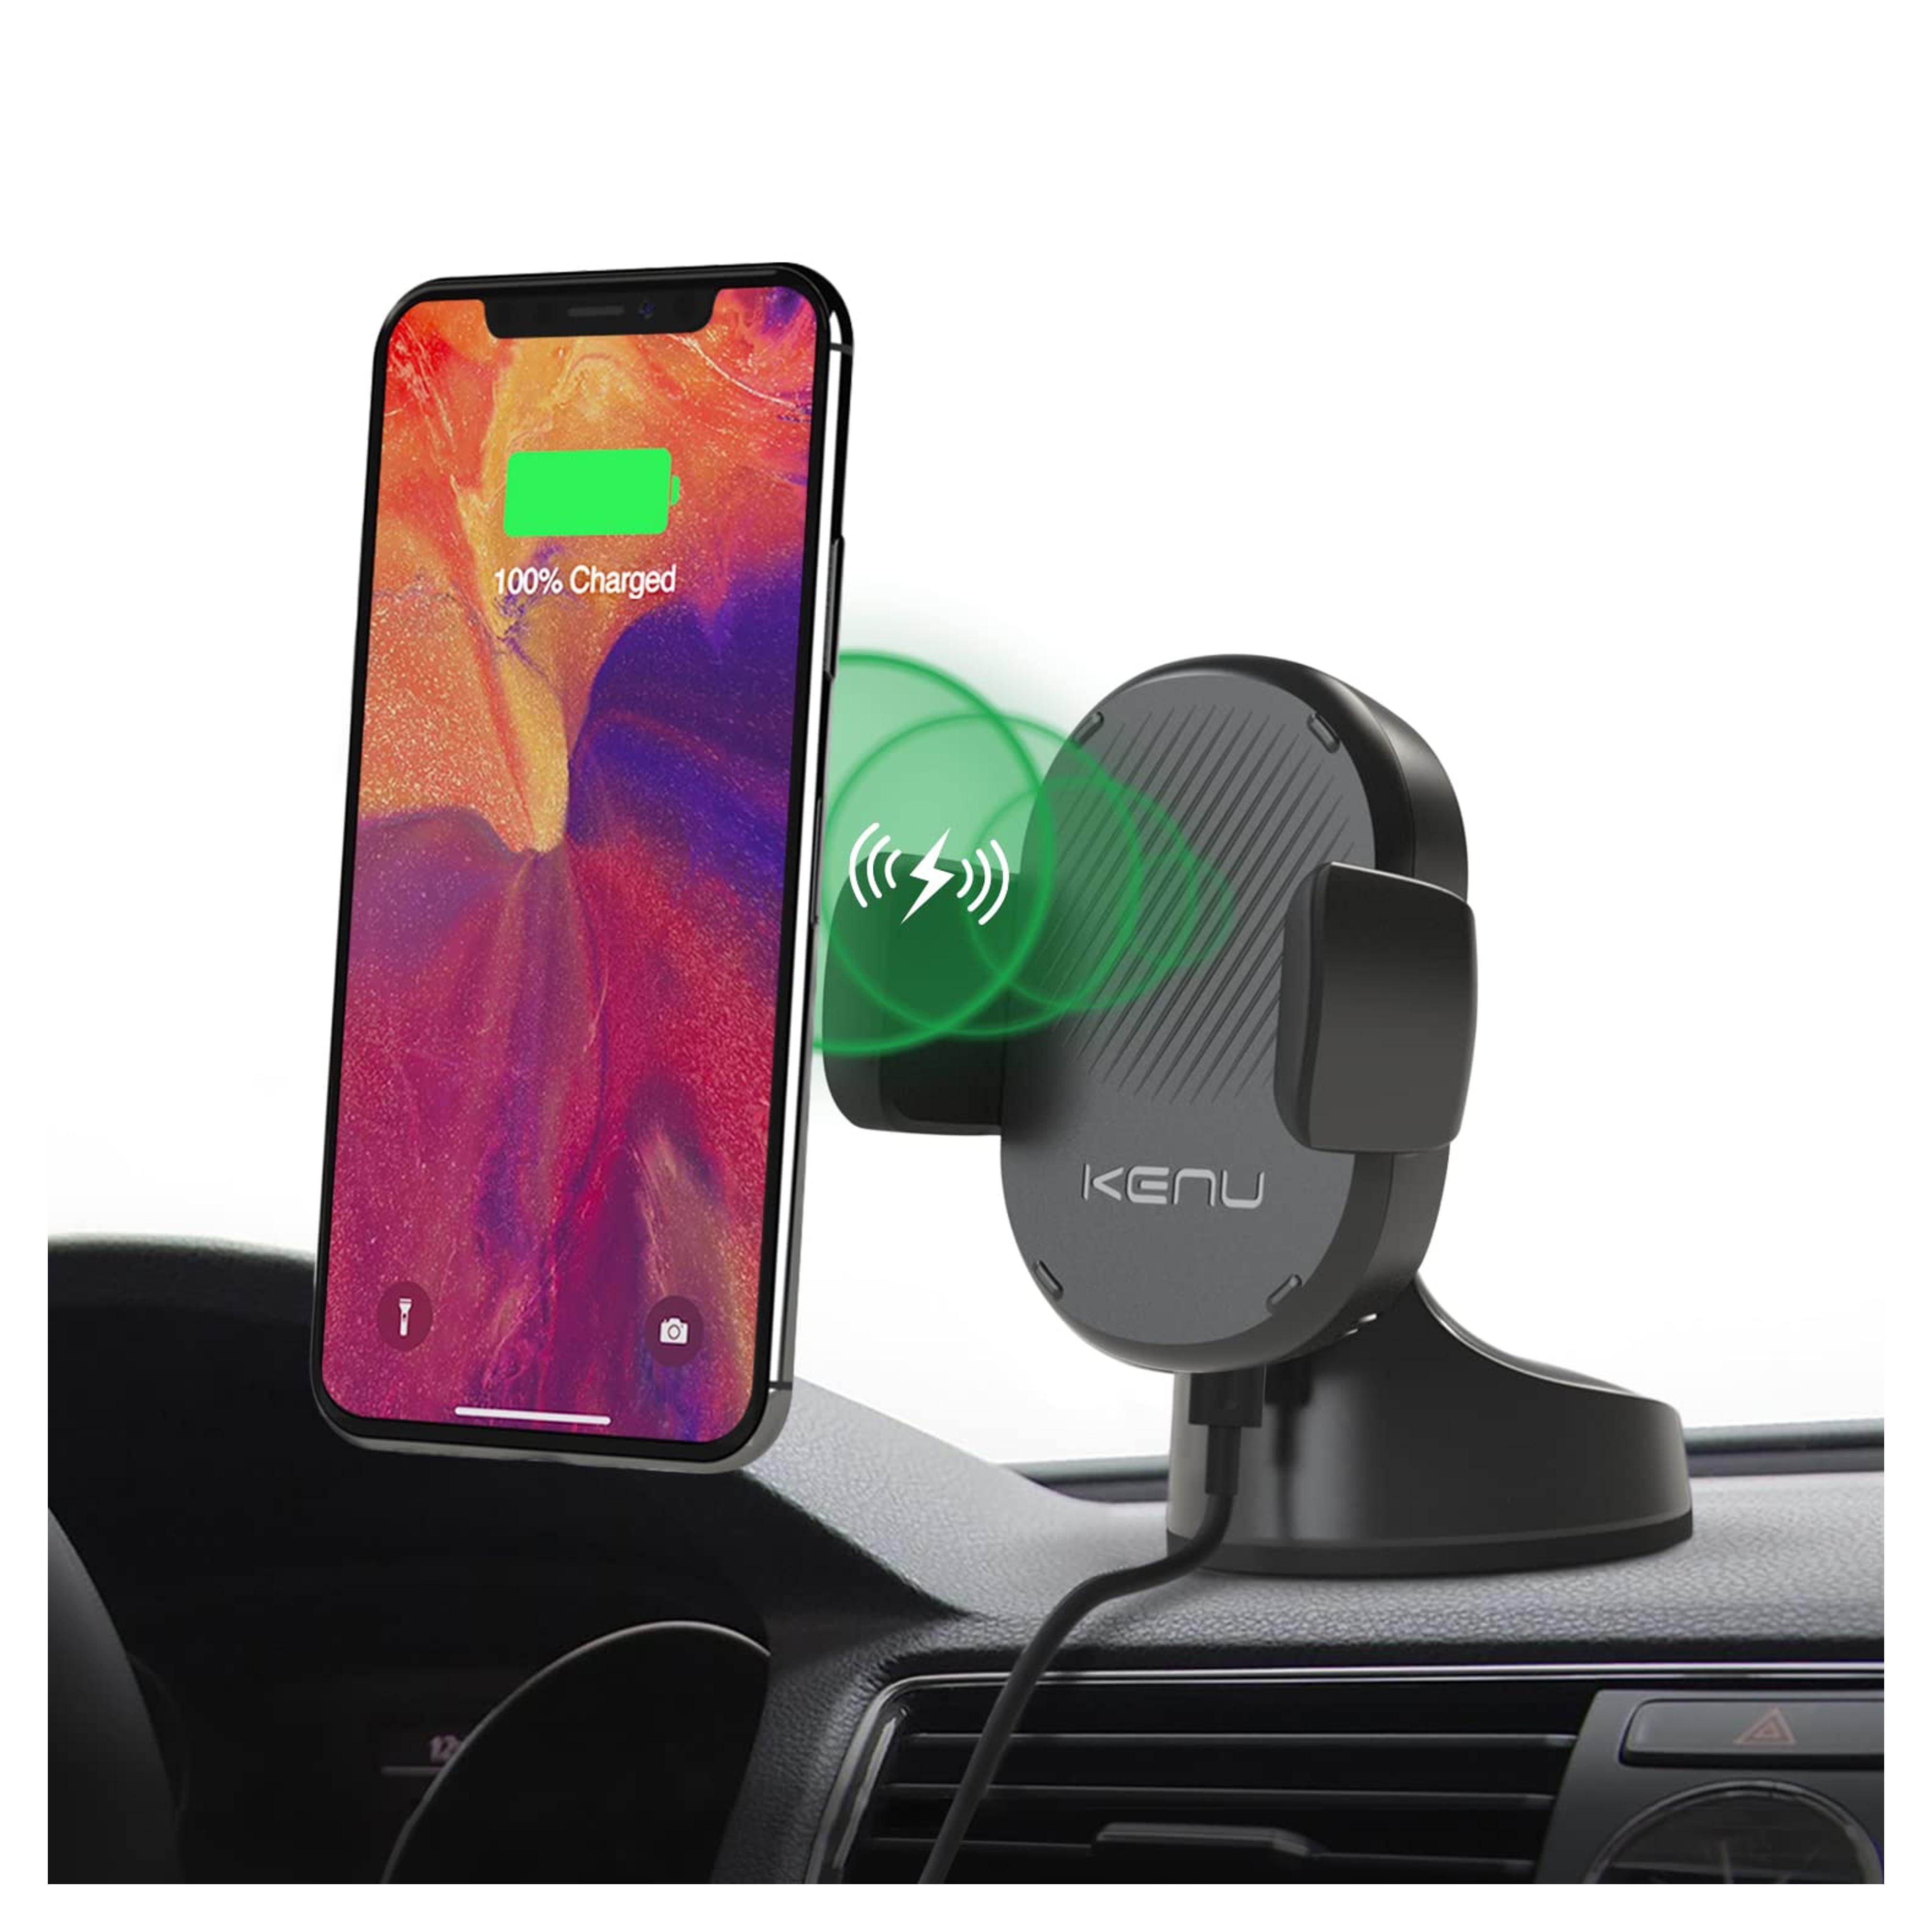 Amazon.com: Kenu Airbase Car Phone Mount Wireless Charger - Windshield, Dashboard, Desk Phone Holder - Suction Cup and 360 Degree Pivot, Qi Fast-Charging - Use with Latest iPhones, Samsung and Androids : Cell Phones & Accessories